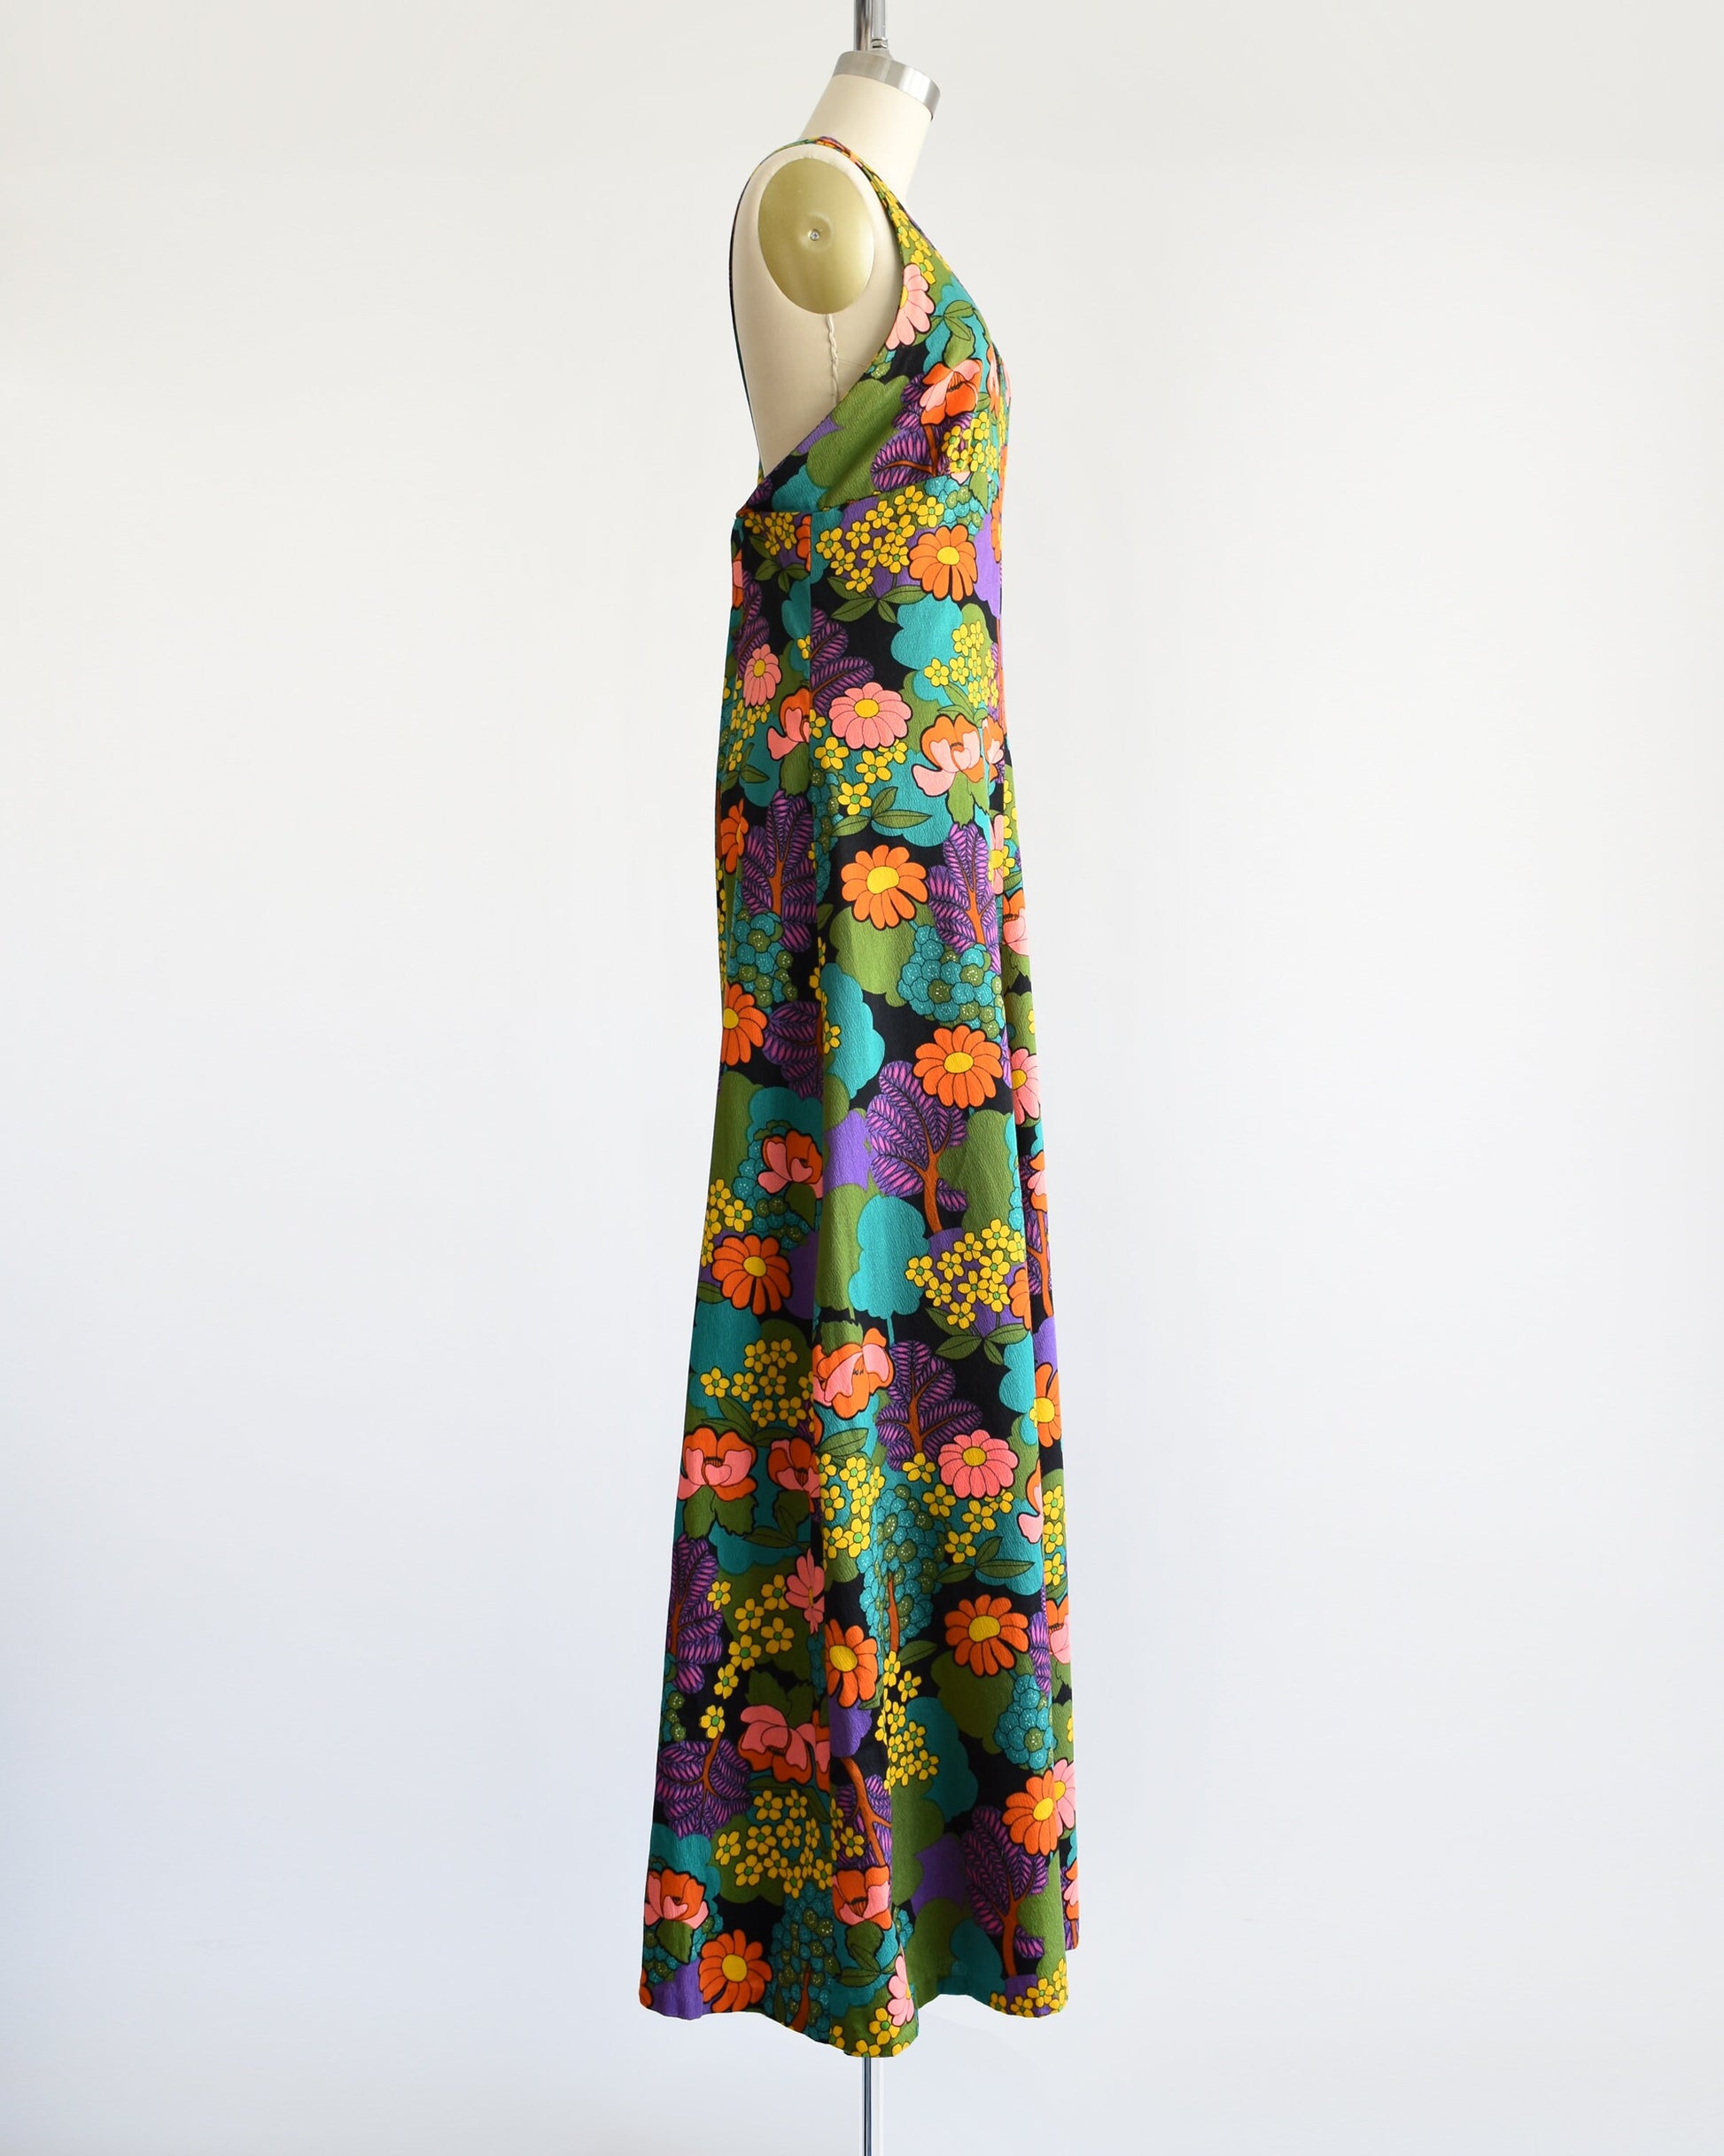 Side view of a vintage 70s floral maxi dress that is black and has a vibrant flower power print in greens, blue, peach, orange, yellow, purple, and white. V-neckline. Dress is on dress form.